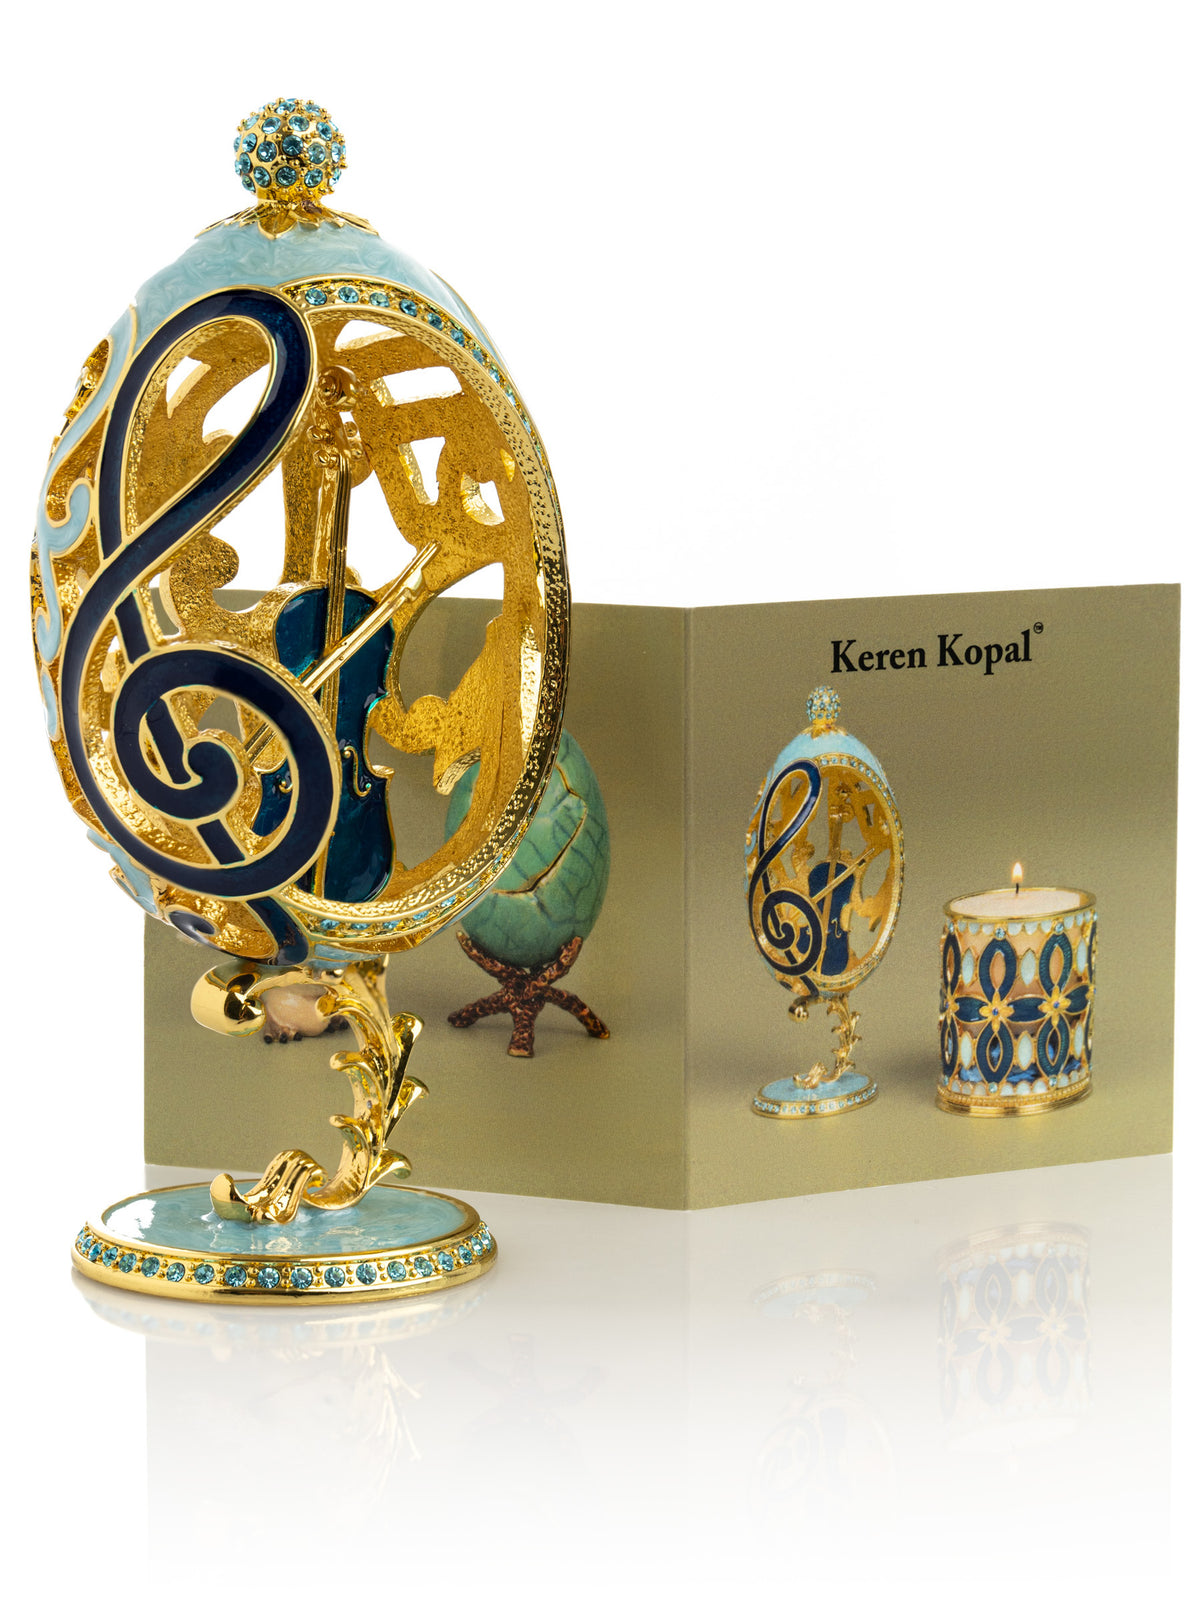 Treble Clef Faberge Egg with Violin Surprise